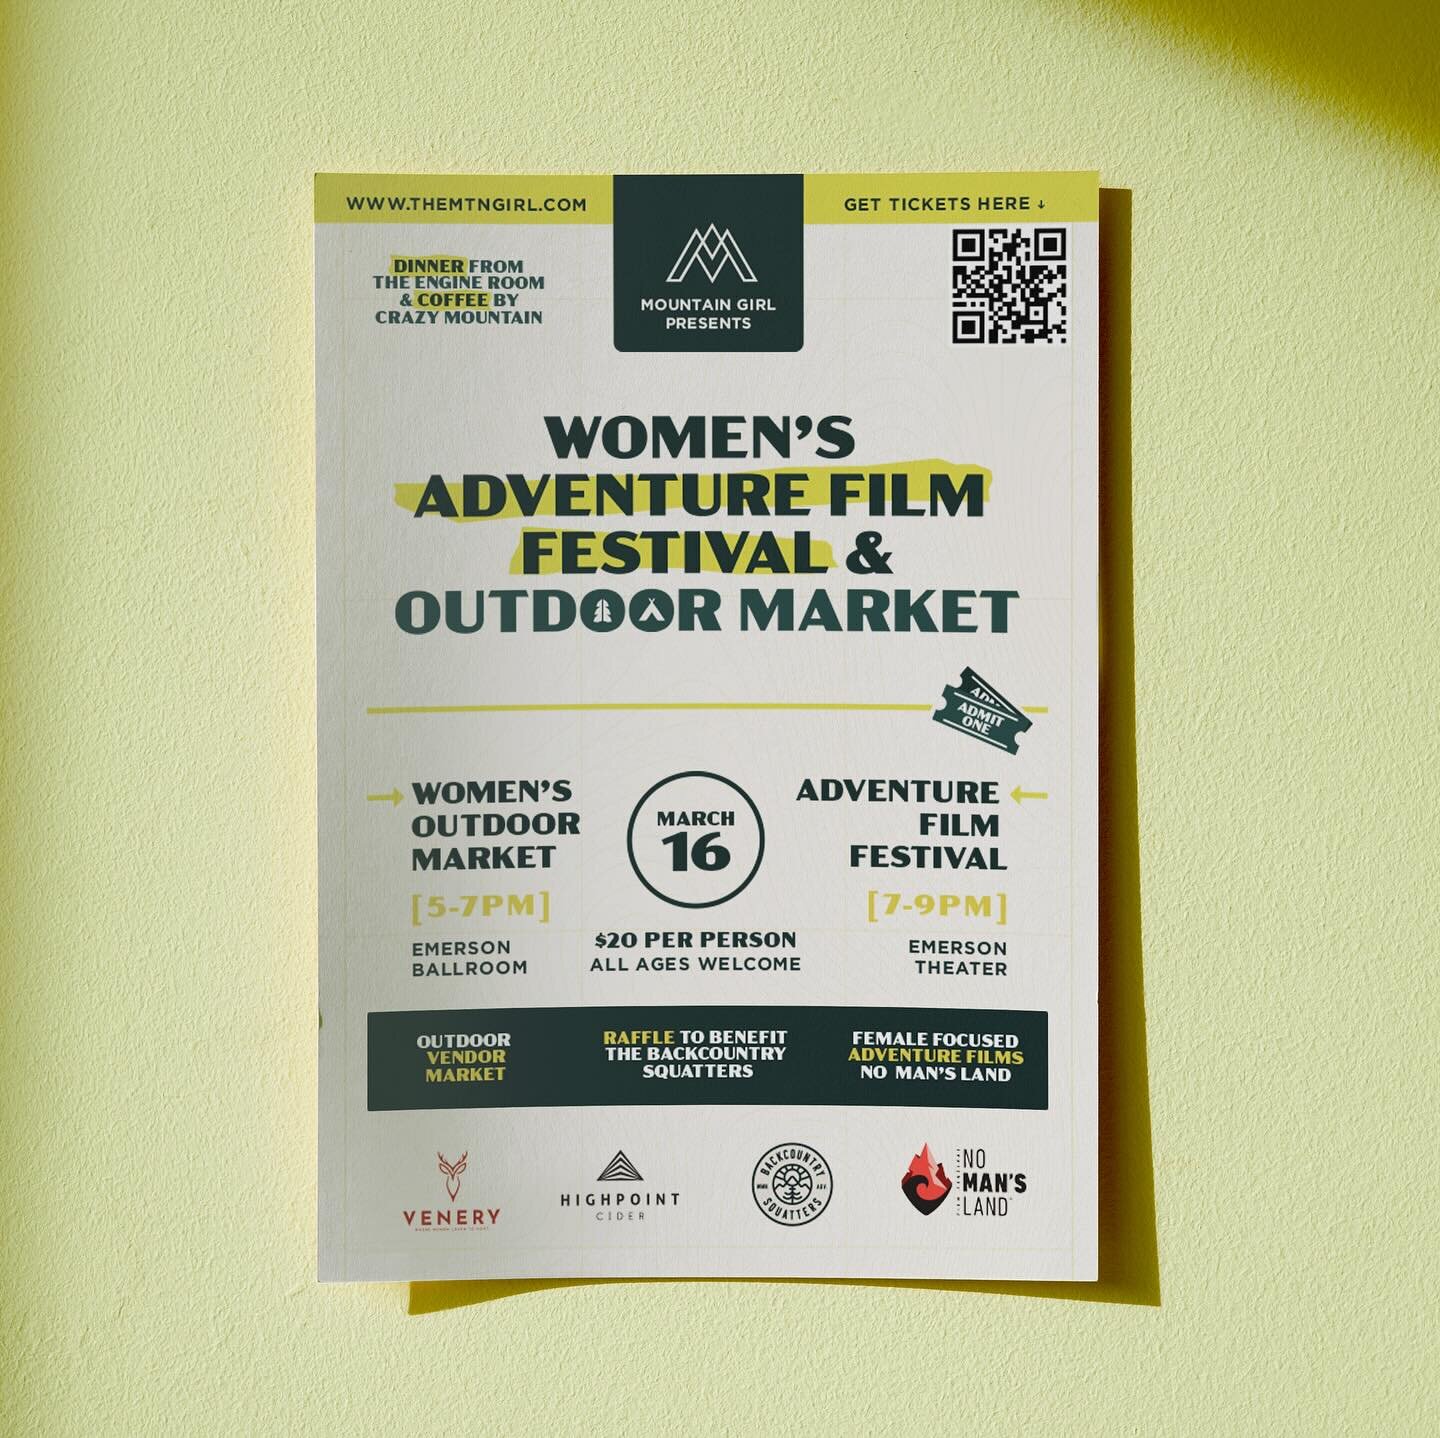 This Saturday come check out No Man&rsquo;s Land Adventure Film Festival at the Emerson! I&rsquo;ll be there from 5-7 with fresh roasted coffee along with a whole slew of rad ladies at the Women&rsquo;s Outdoor Market before the films start. Tickets 